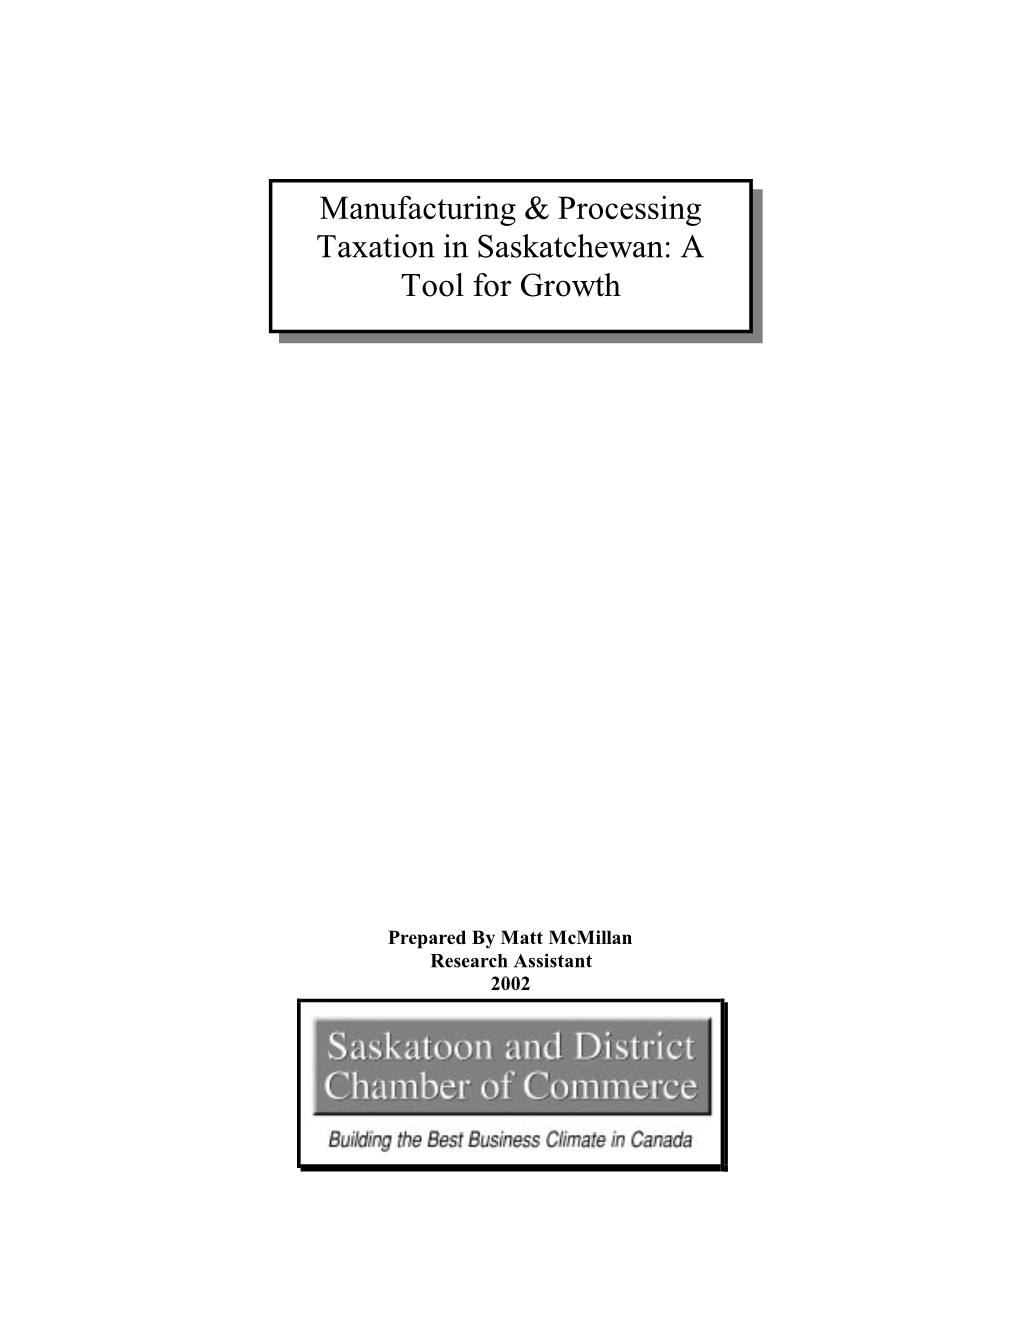 Manufacturing & Processing Taxation